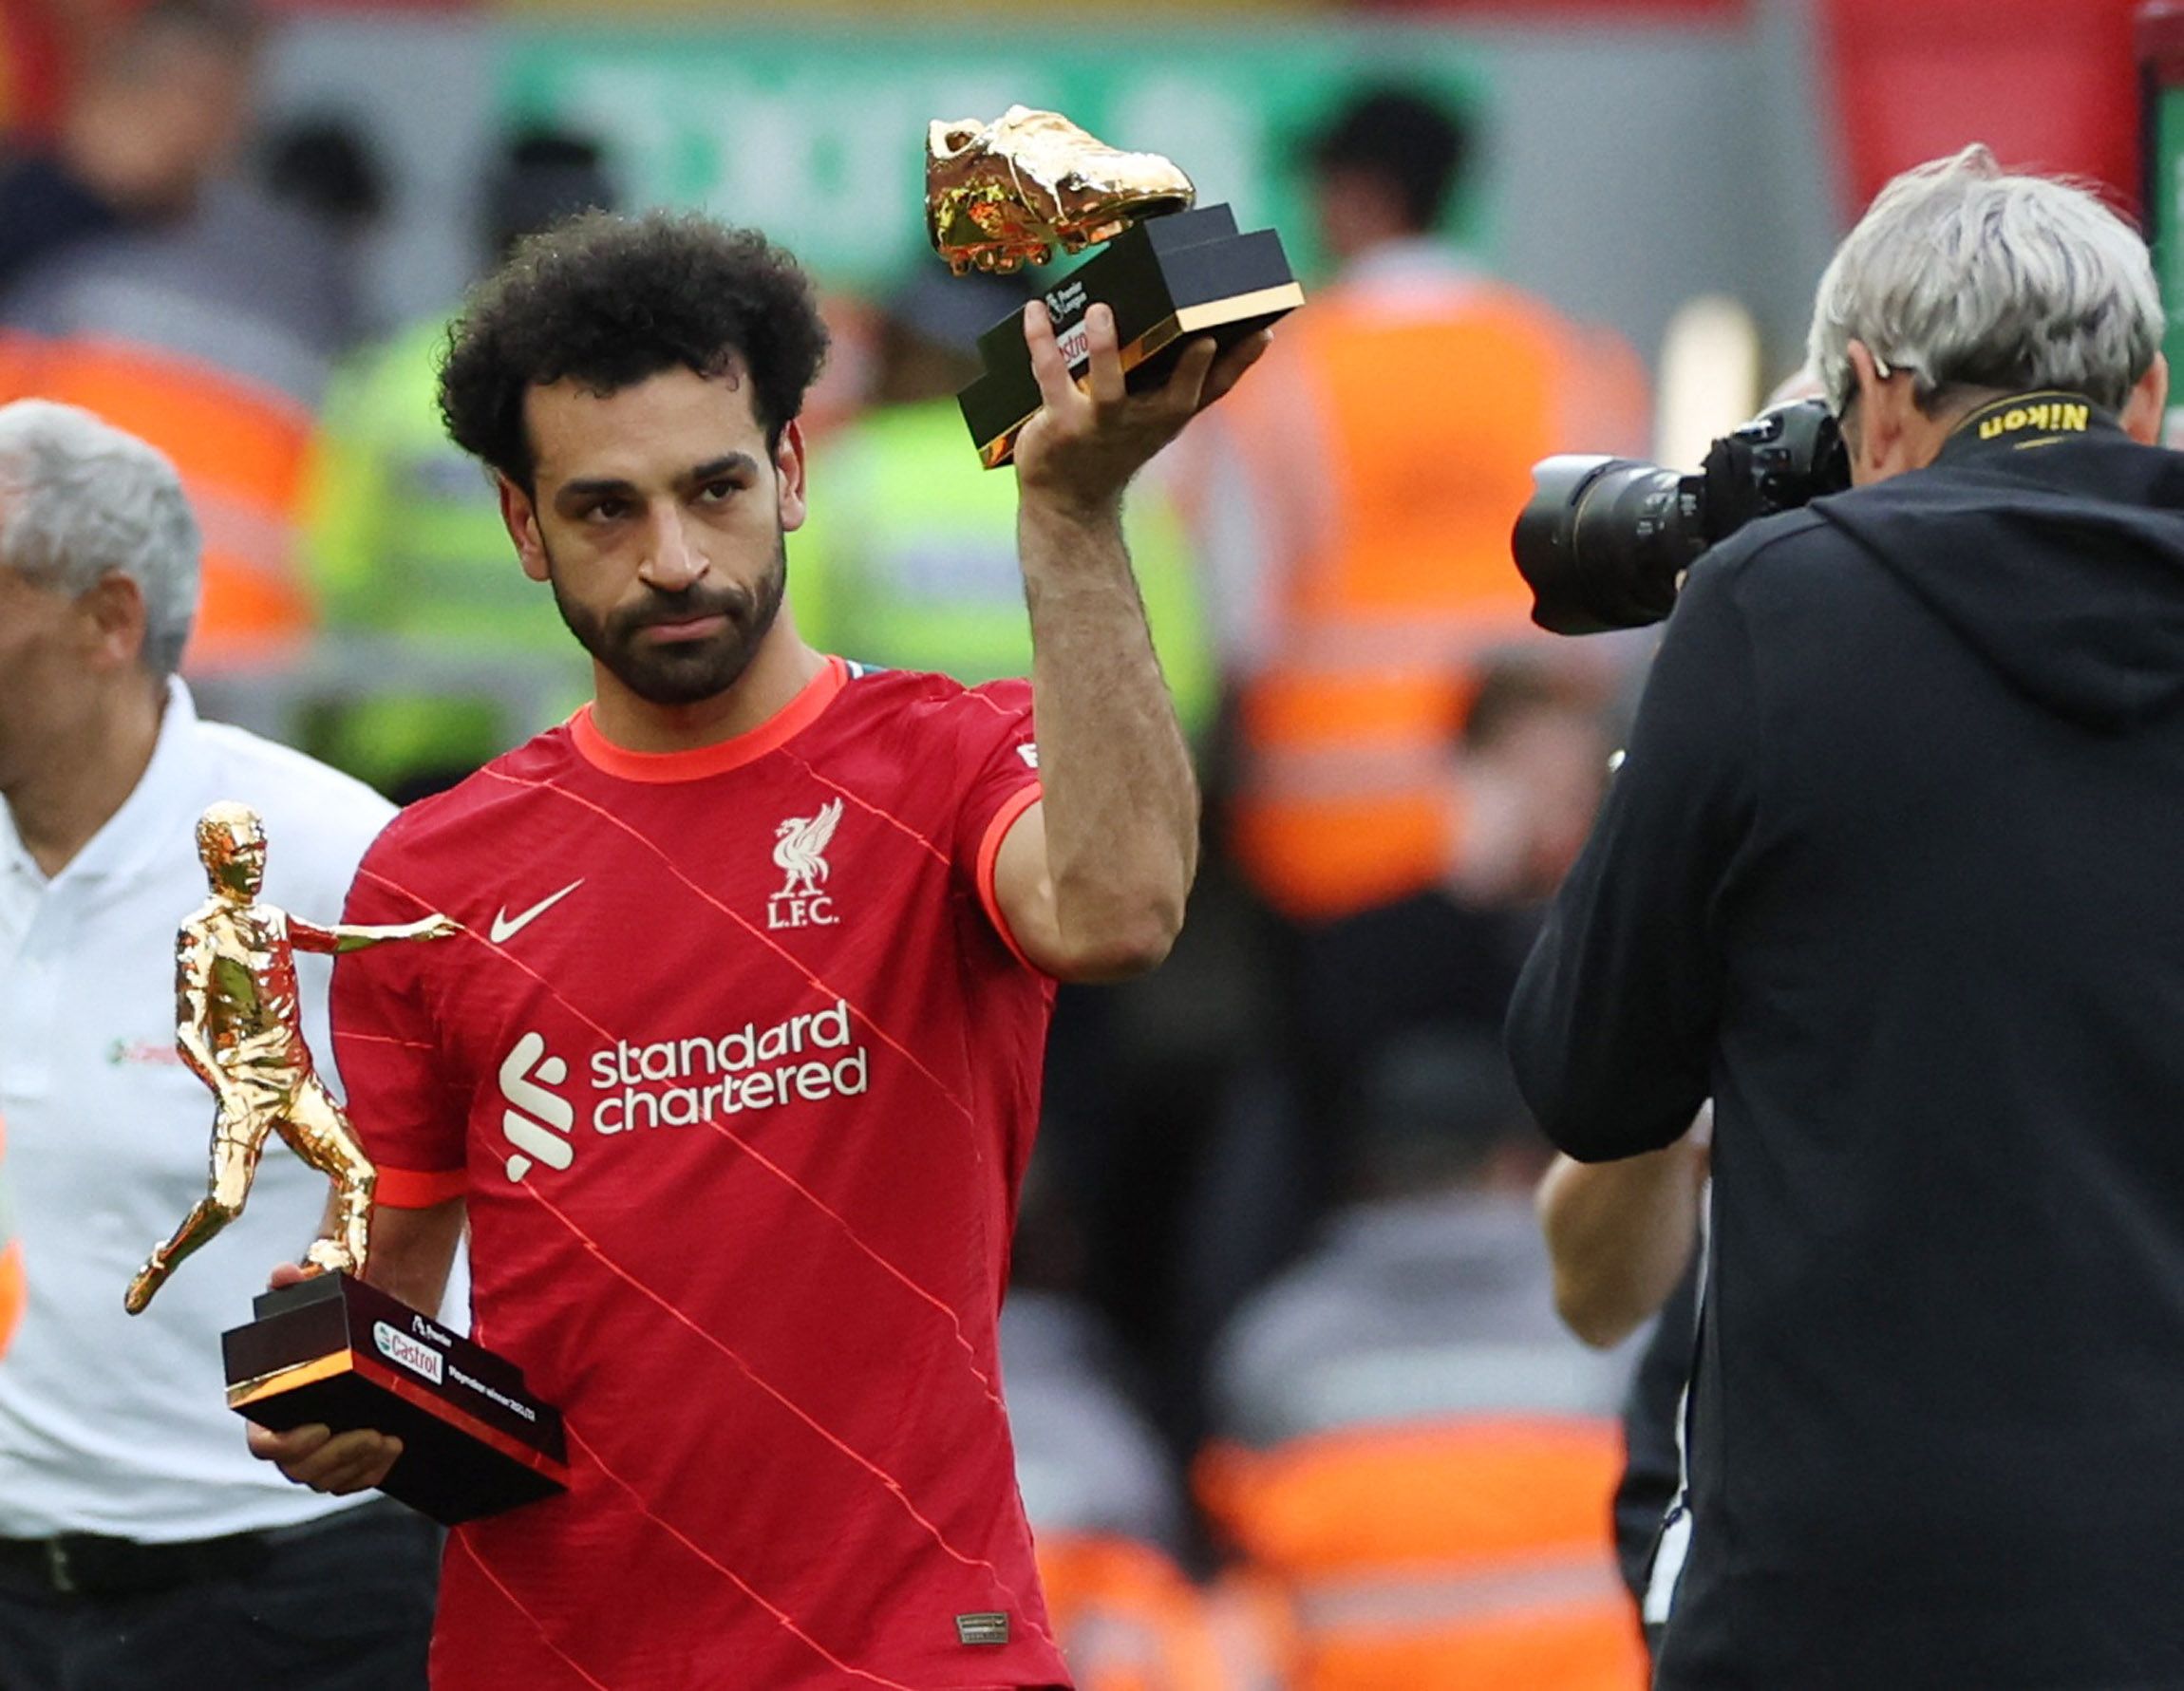 Soccer Football - Premier League - Liverpool v Wolverhampton Wanderers - Anfield, Liverpool, Britain - May 22, 2022 Liverpool's Mohamed Salah holding the Premier League Playmaker and Golden Boot winner trophies after the match REUTERS/Phil Noble EDITORIAL USE ONLY. No use with unauthorized audio, video, data, fixture lists, club/league logos or 'live' services. Online in-match use limited to 75 images, no video emulation. No use in betting, games or single club /league/player publications.  Plea